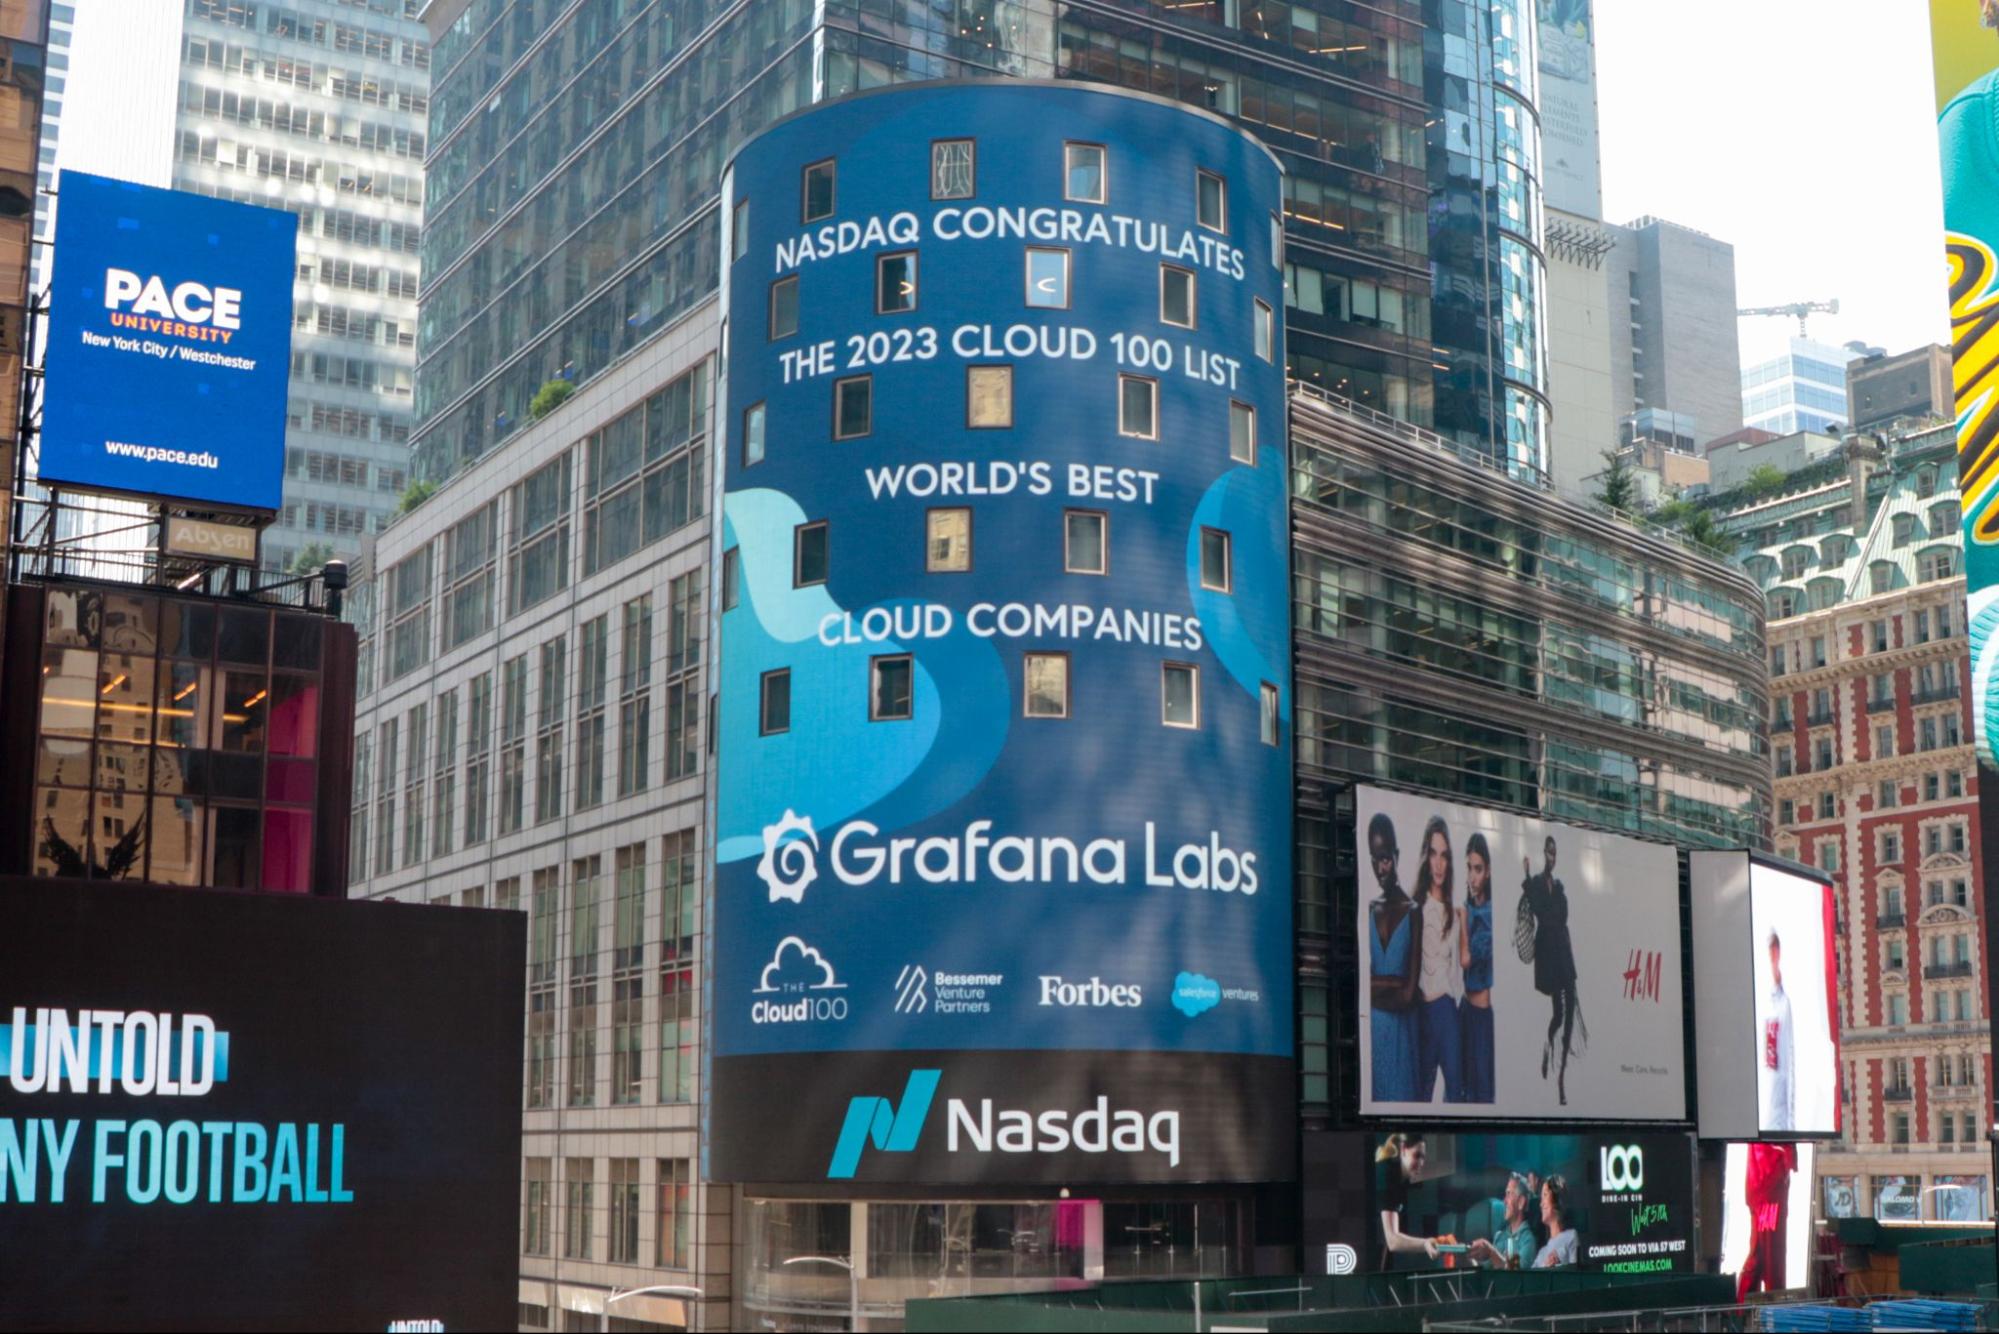 A photo of Grafana Labs listed on the Forbes 100 list on the Nasdaq Tower.